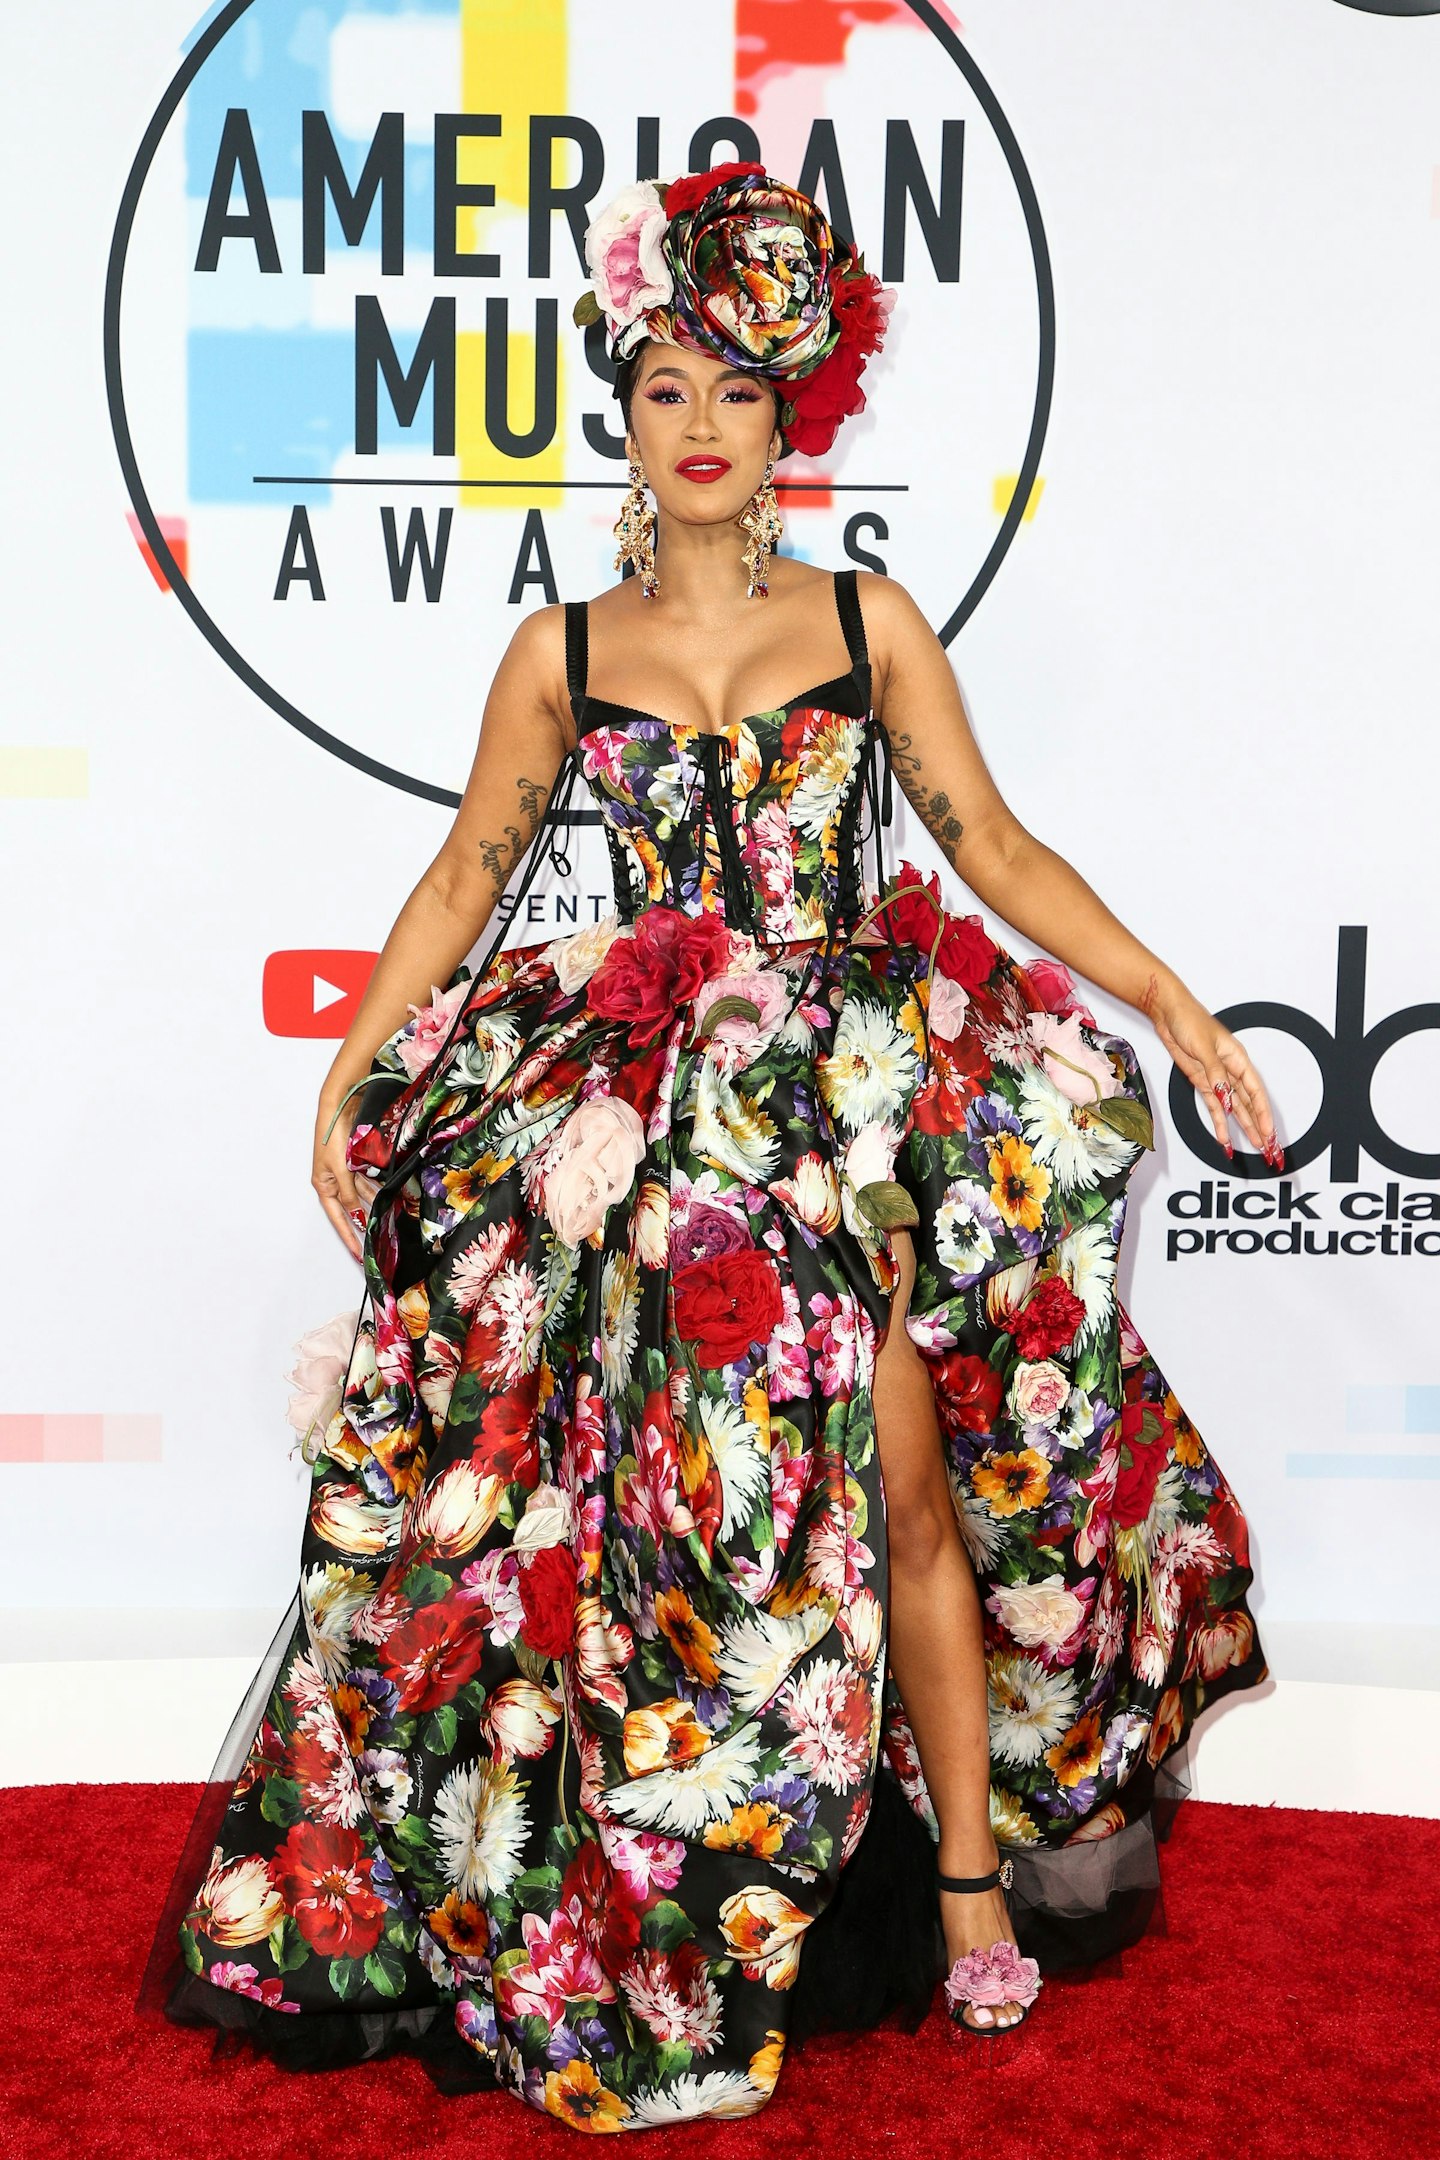 AMA 2018 wildest outfits